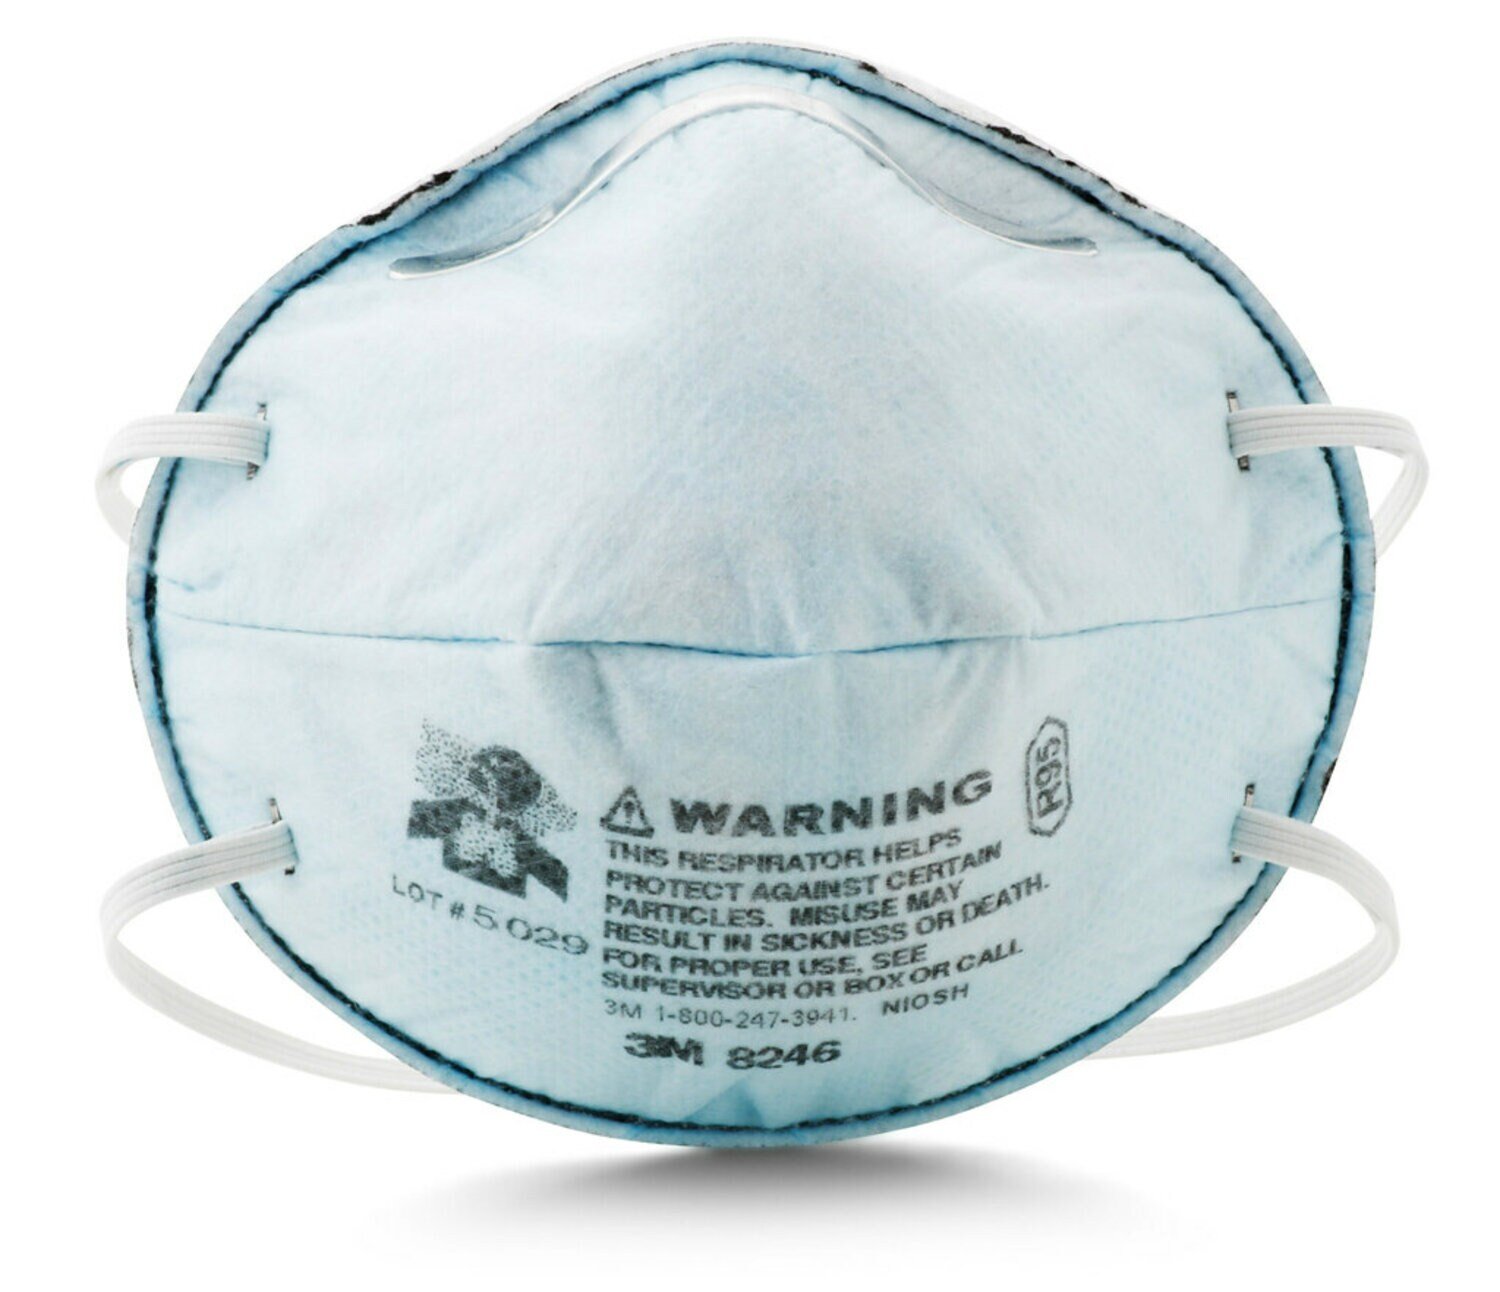 7000002059 - 3M Particulate Respirator 8246, R95, with Nuisance Level Acid Gas
Relief 120 EA/Case